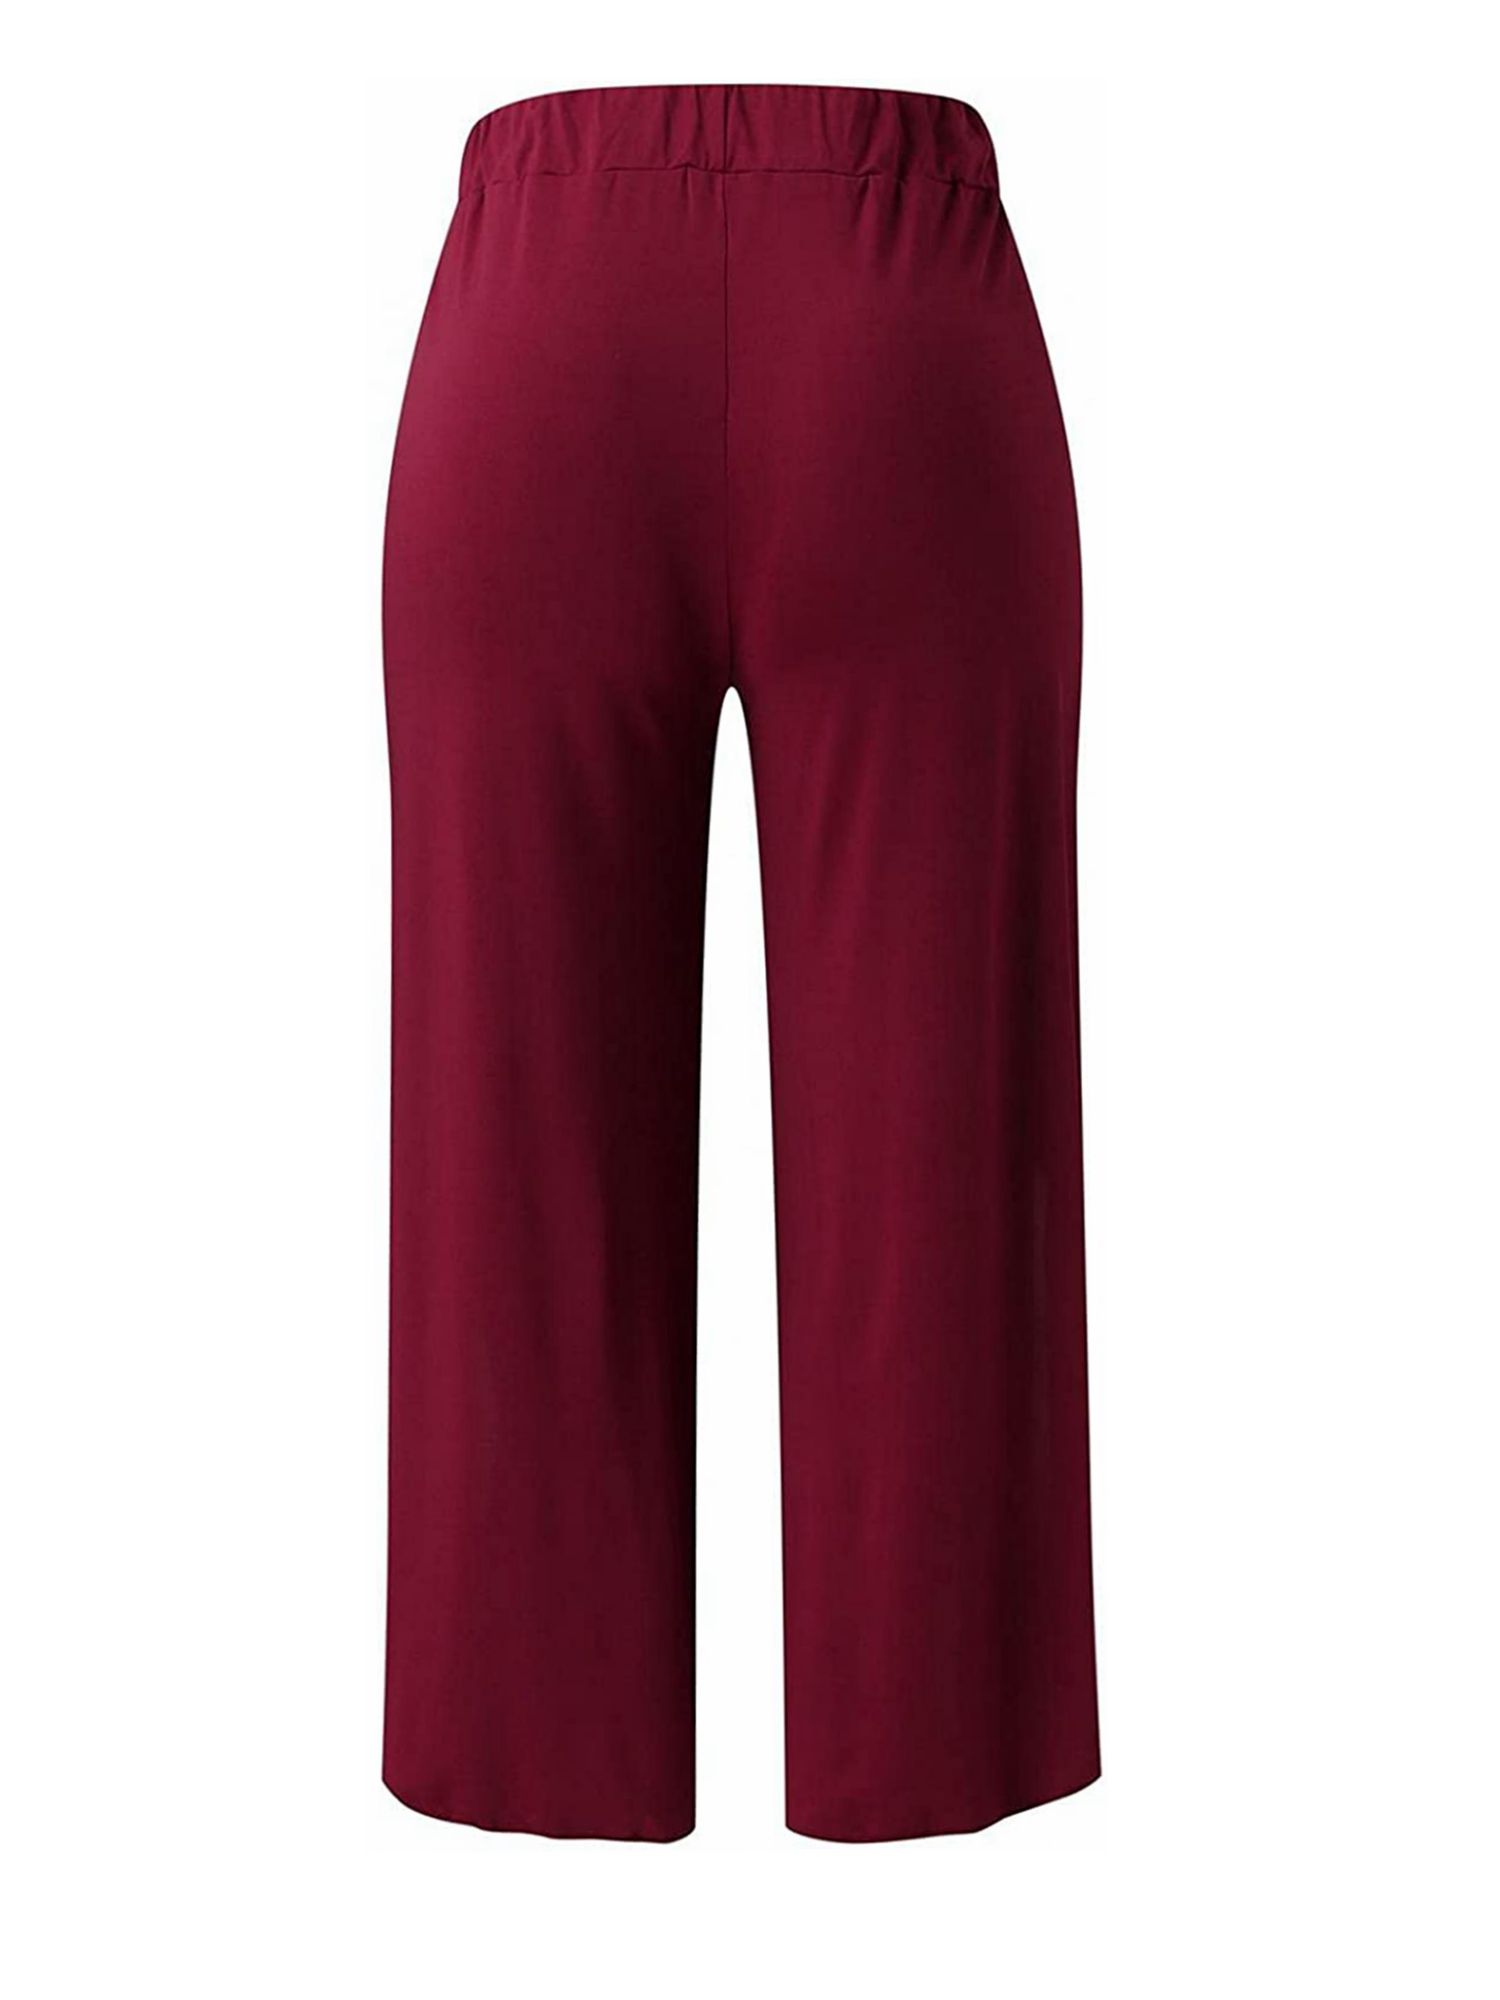 Syiwidii Burgundy Leather Pants Women Wide Leg Trousers Korean Style Y2k  Fashion Loose Pants High Waisted